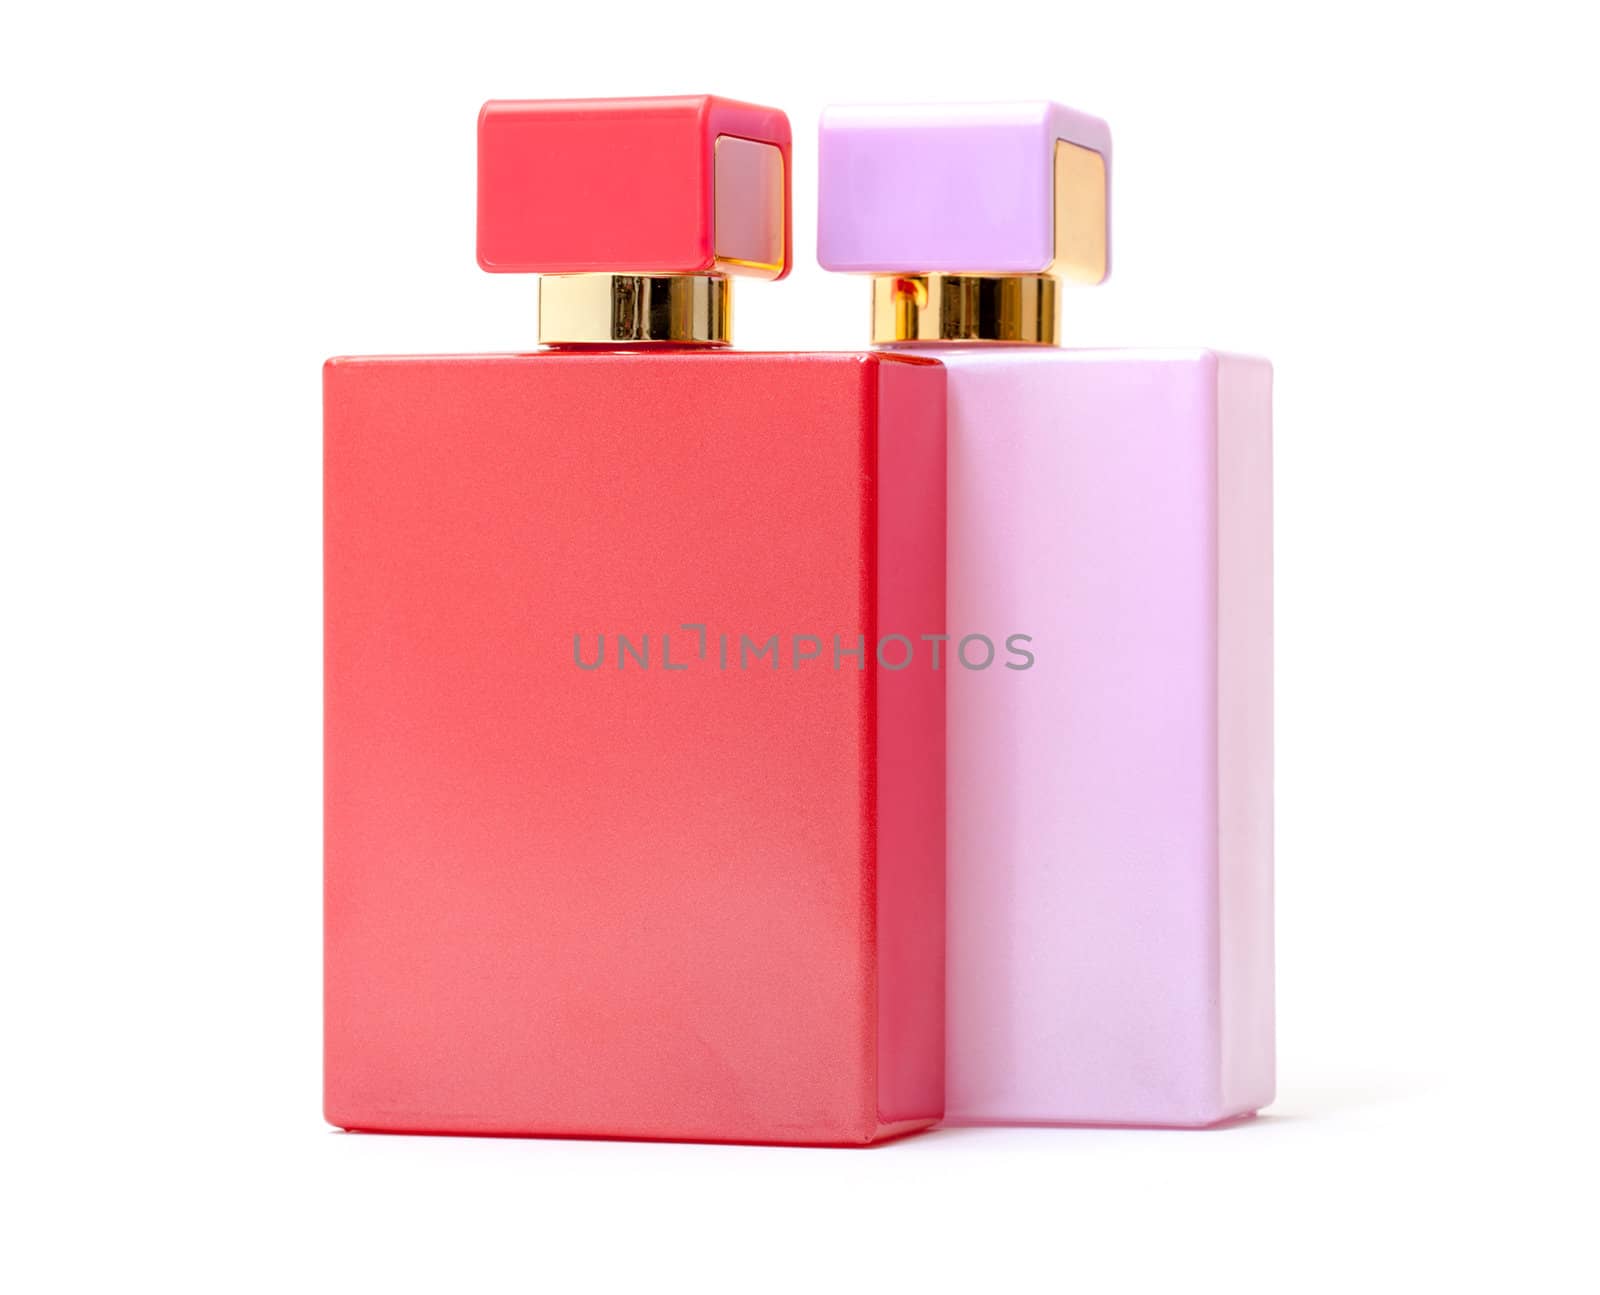 Red and Pink Perfume Bottles on white background